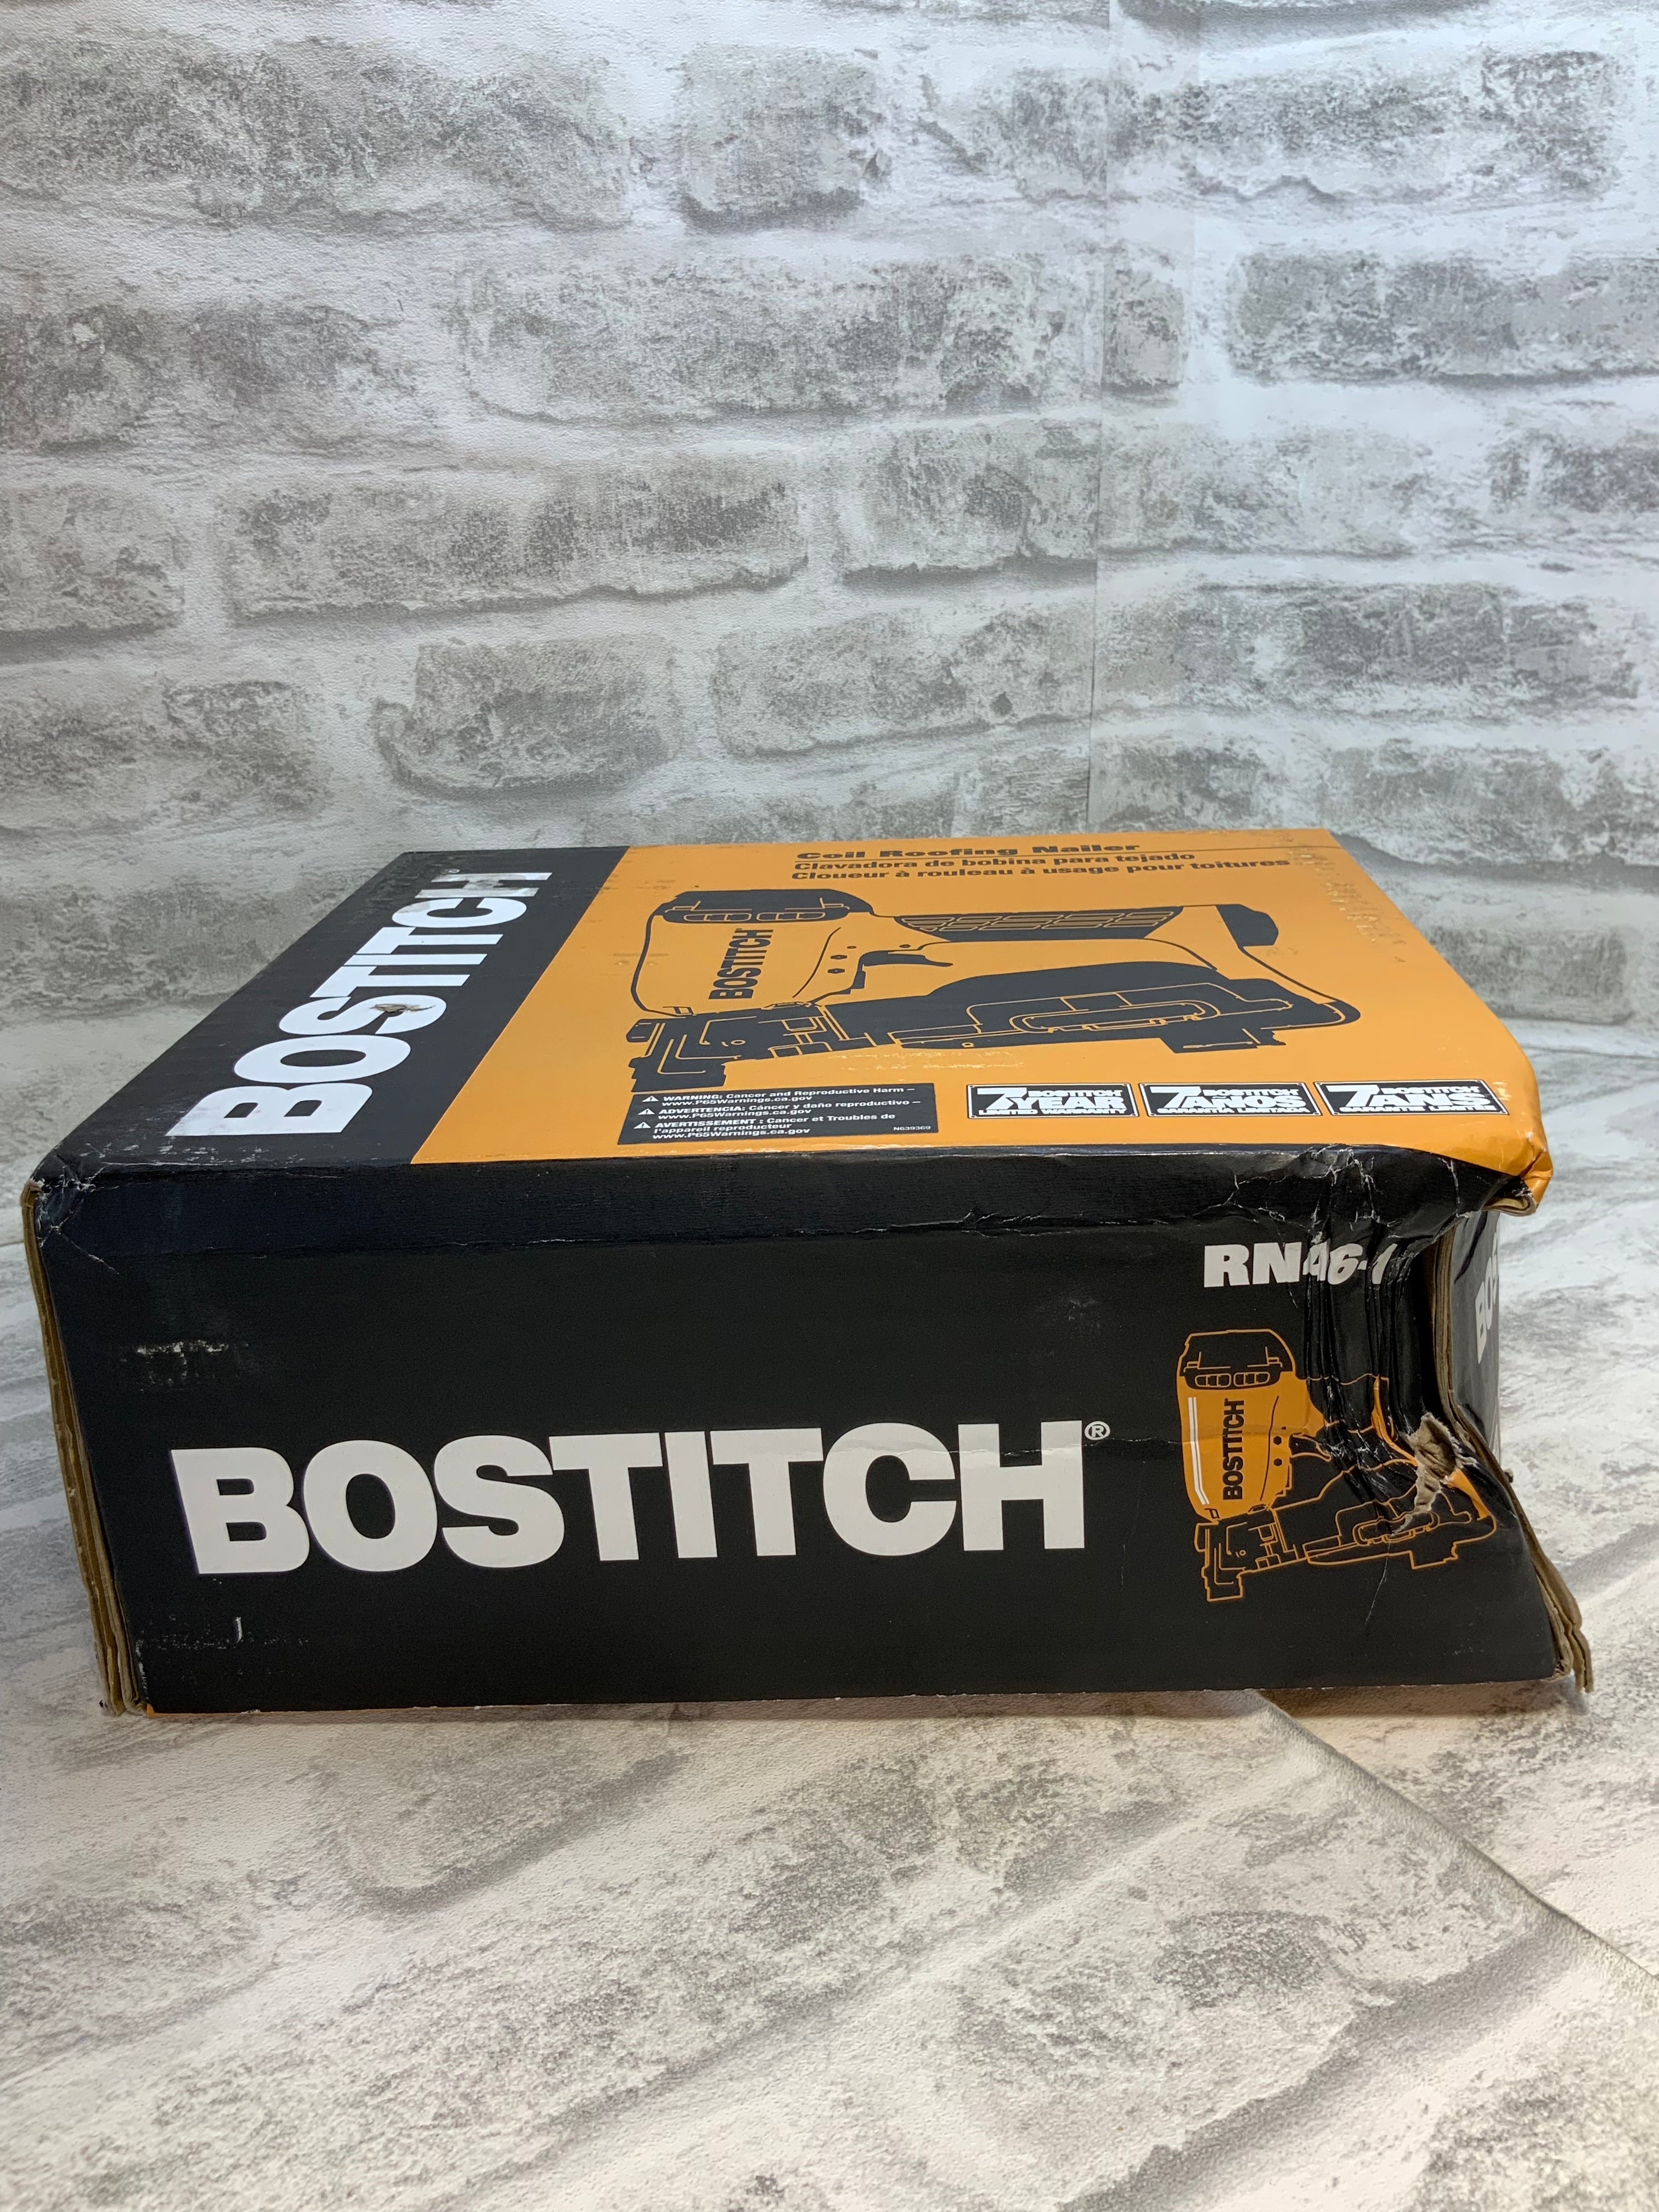 BOSTITCH Coil Roofing Nailer, 1-3/4-Inch to 1-3/4-Inch (RN46) (7607933468910)